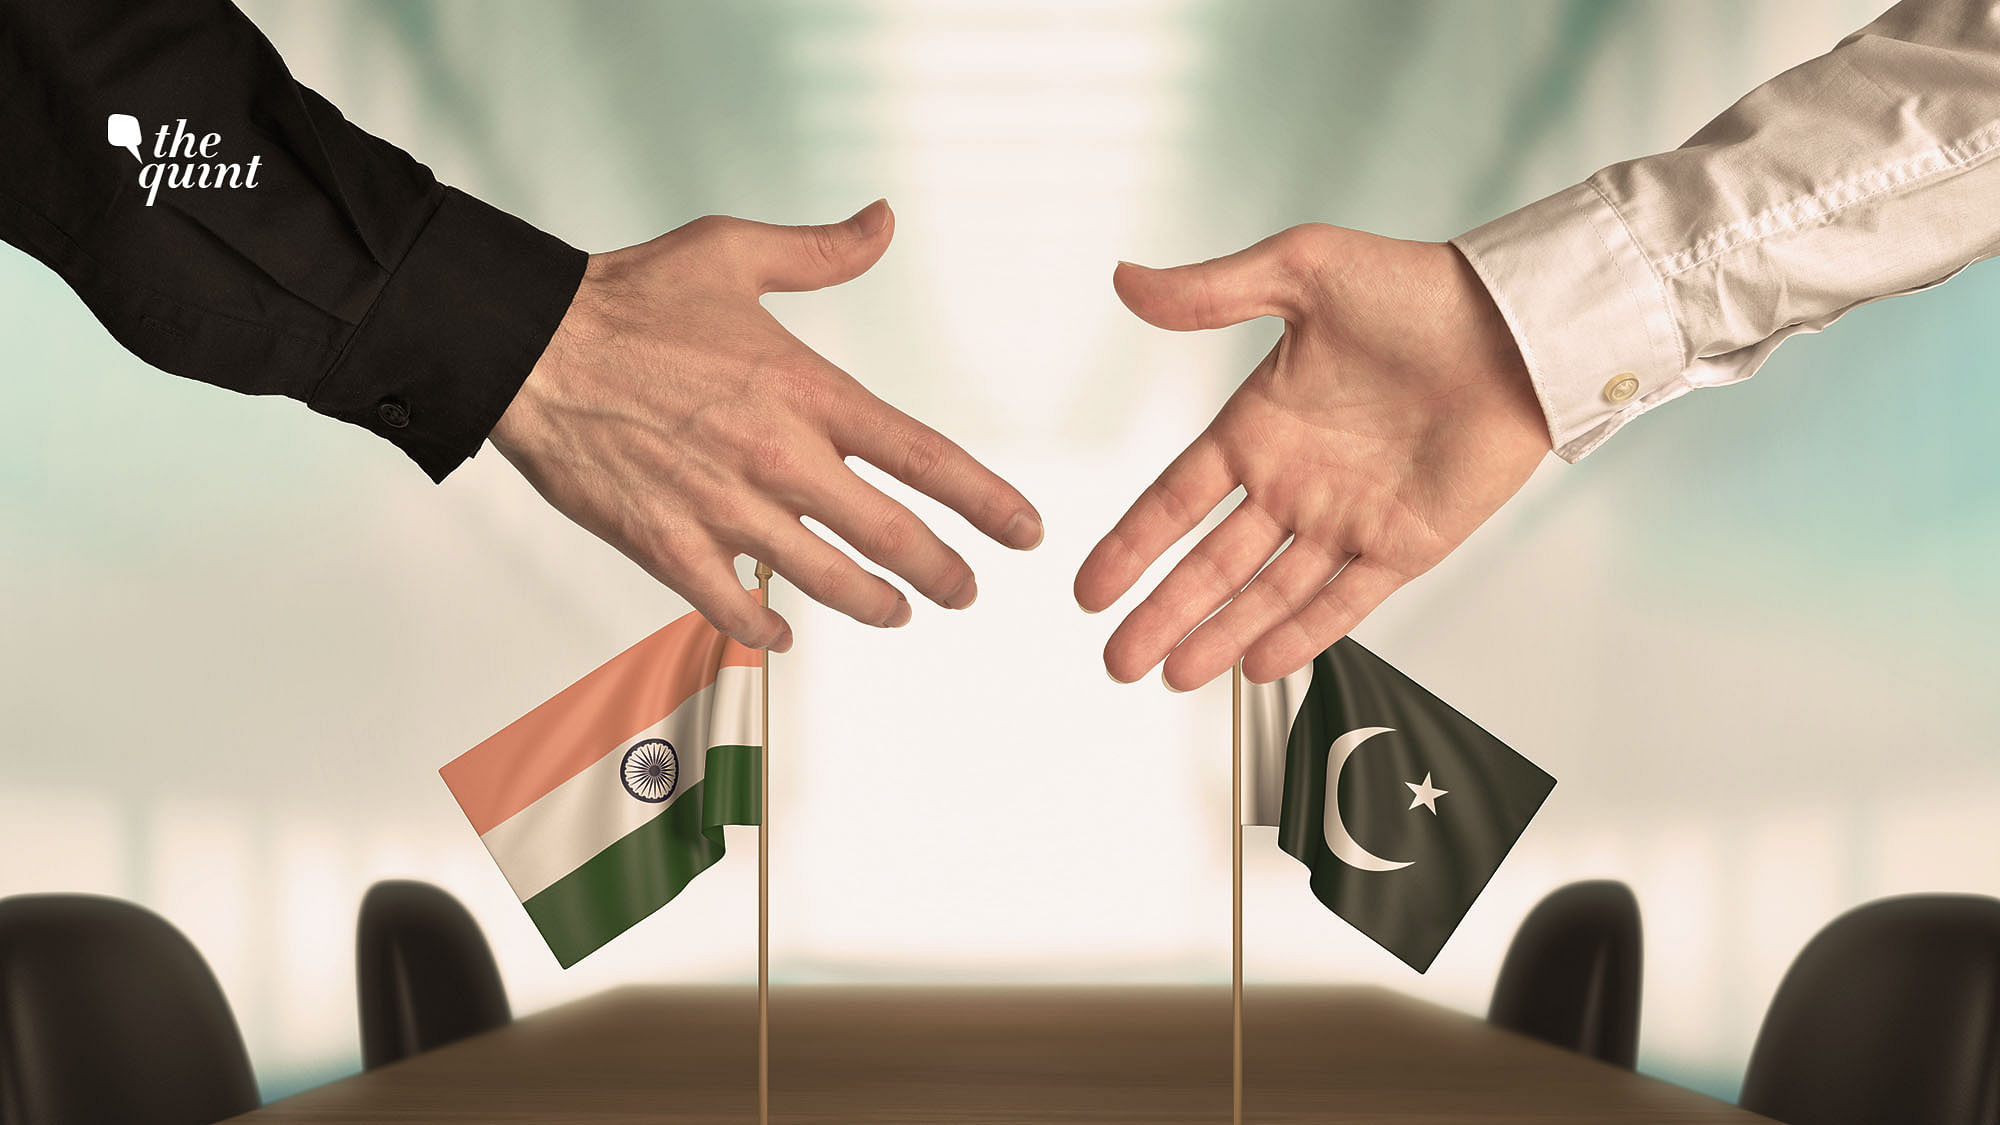 The terms ‘bilateral resolution of conflict’, ‘Lahore Declaration’ and ‘Simla Agreement’ have recently come into focus in context of the India-Pakistan relationship.